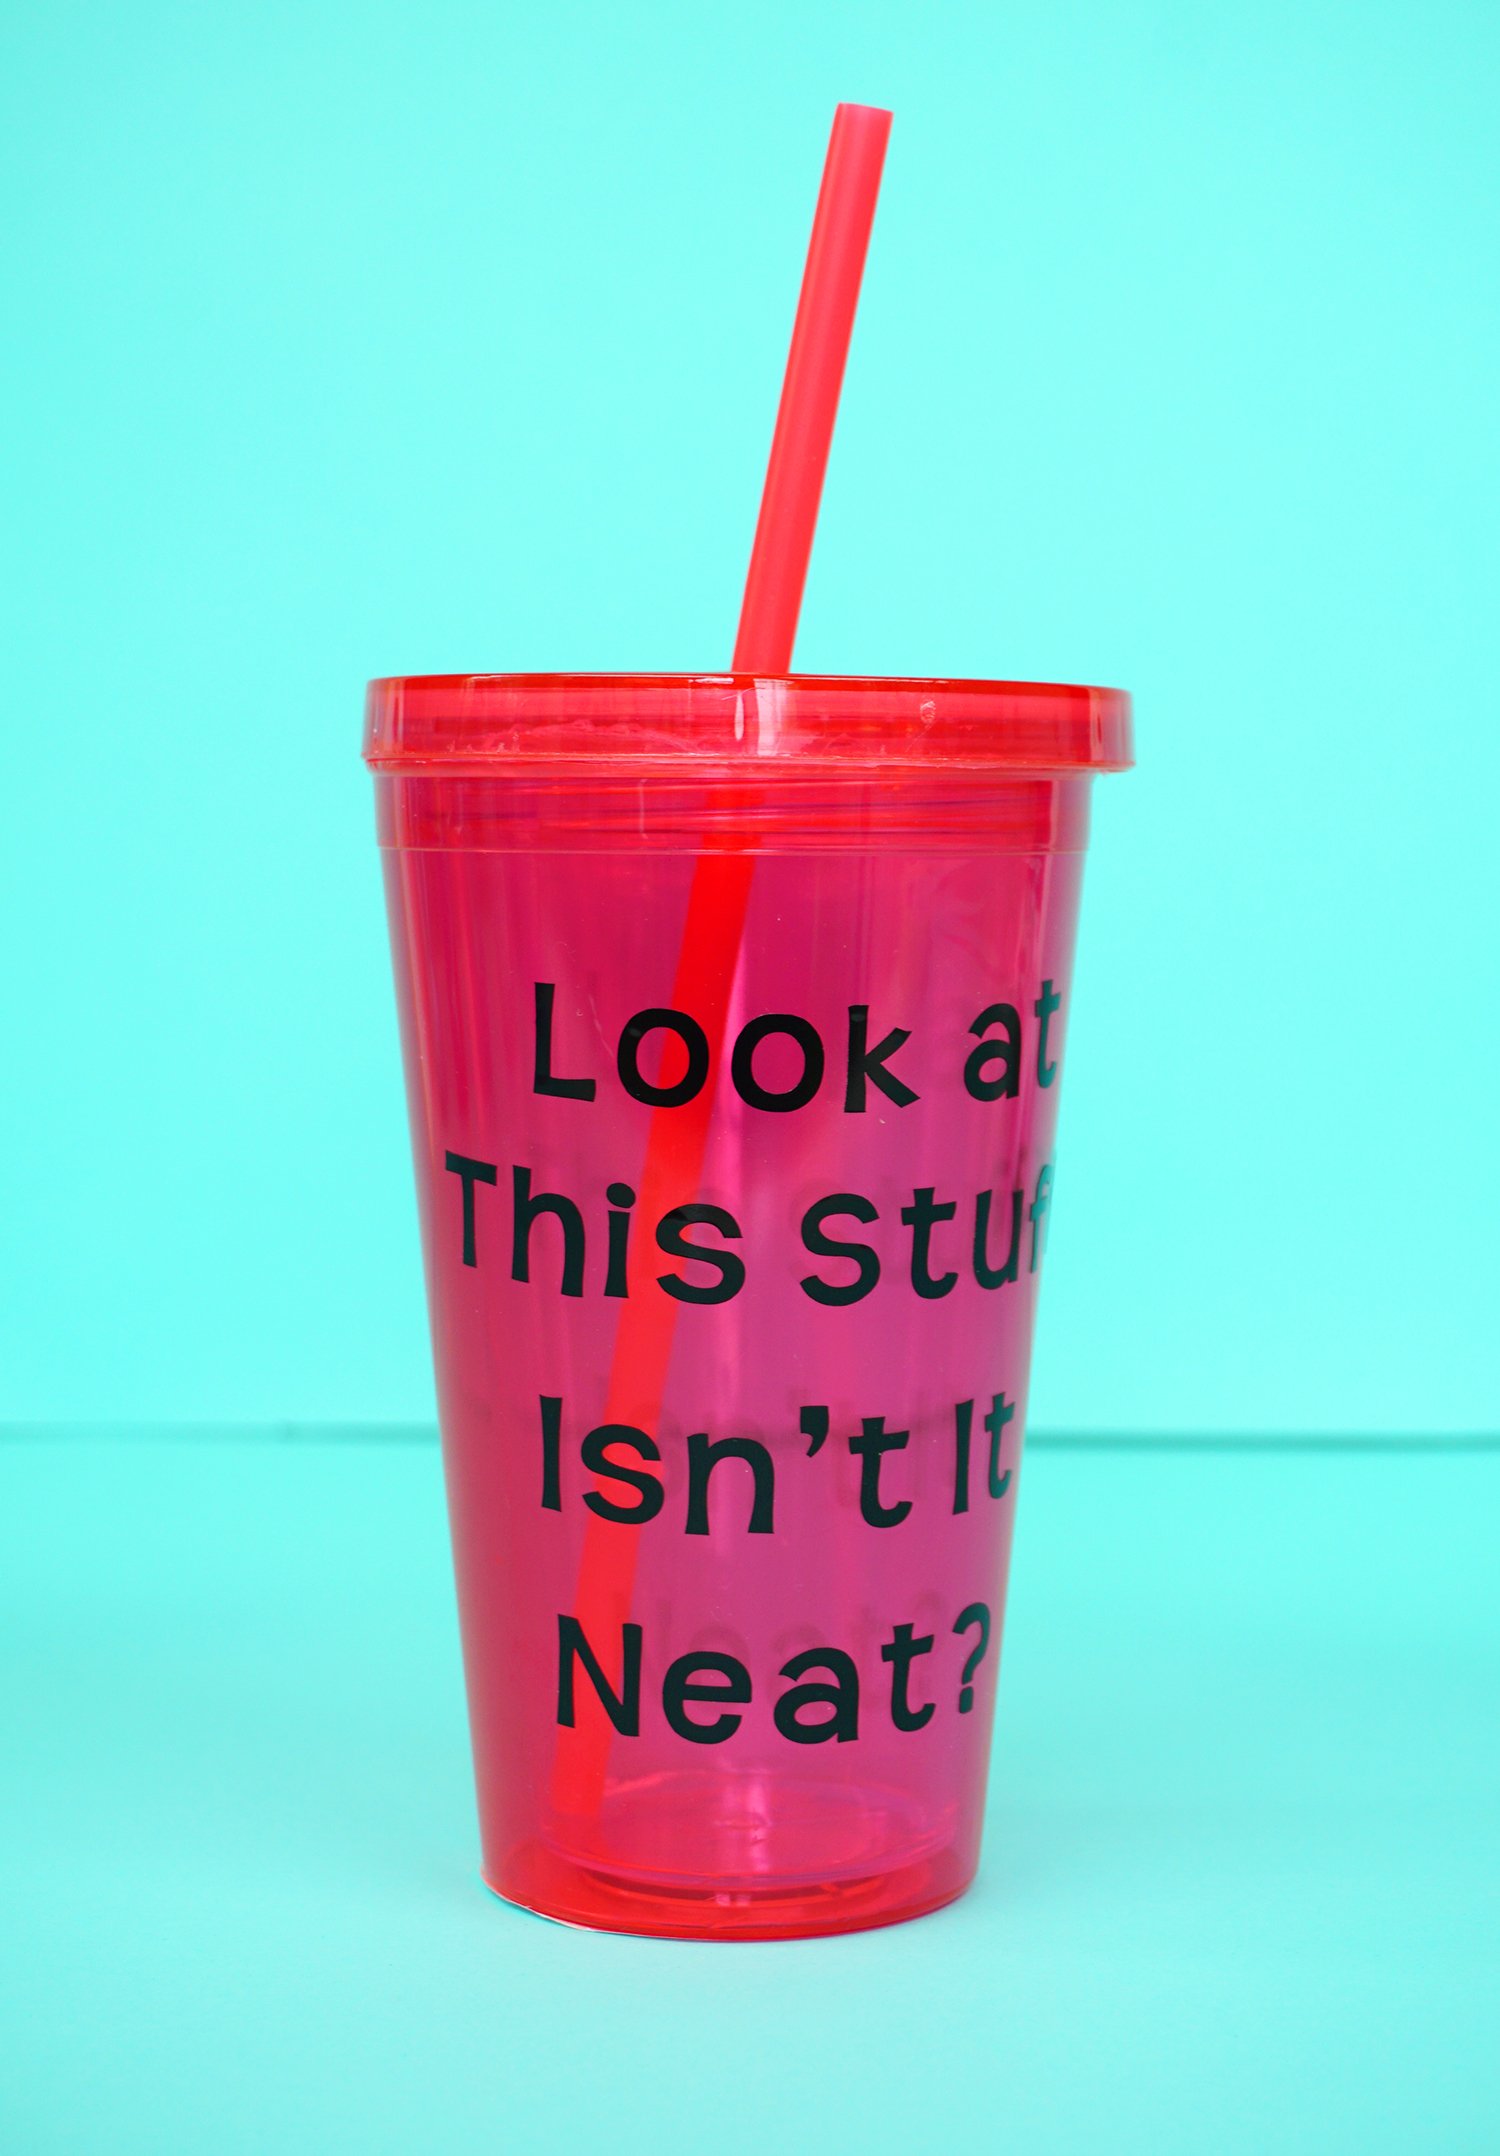 look at this stuff, isnt it neat? printed on red tumbler